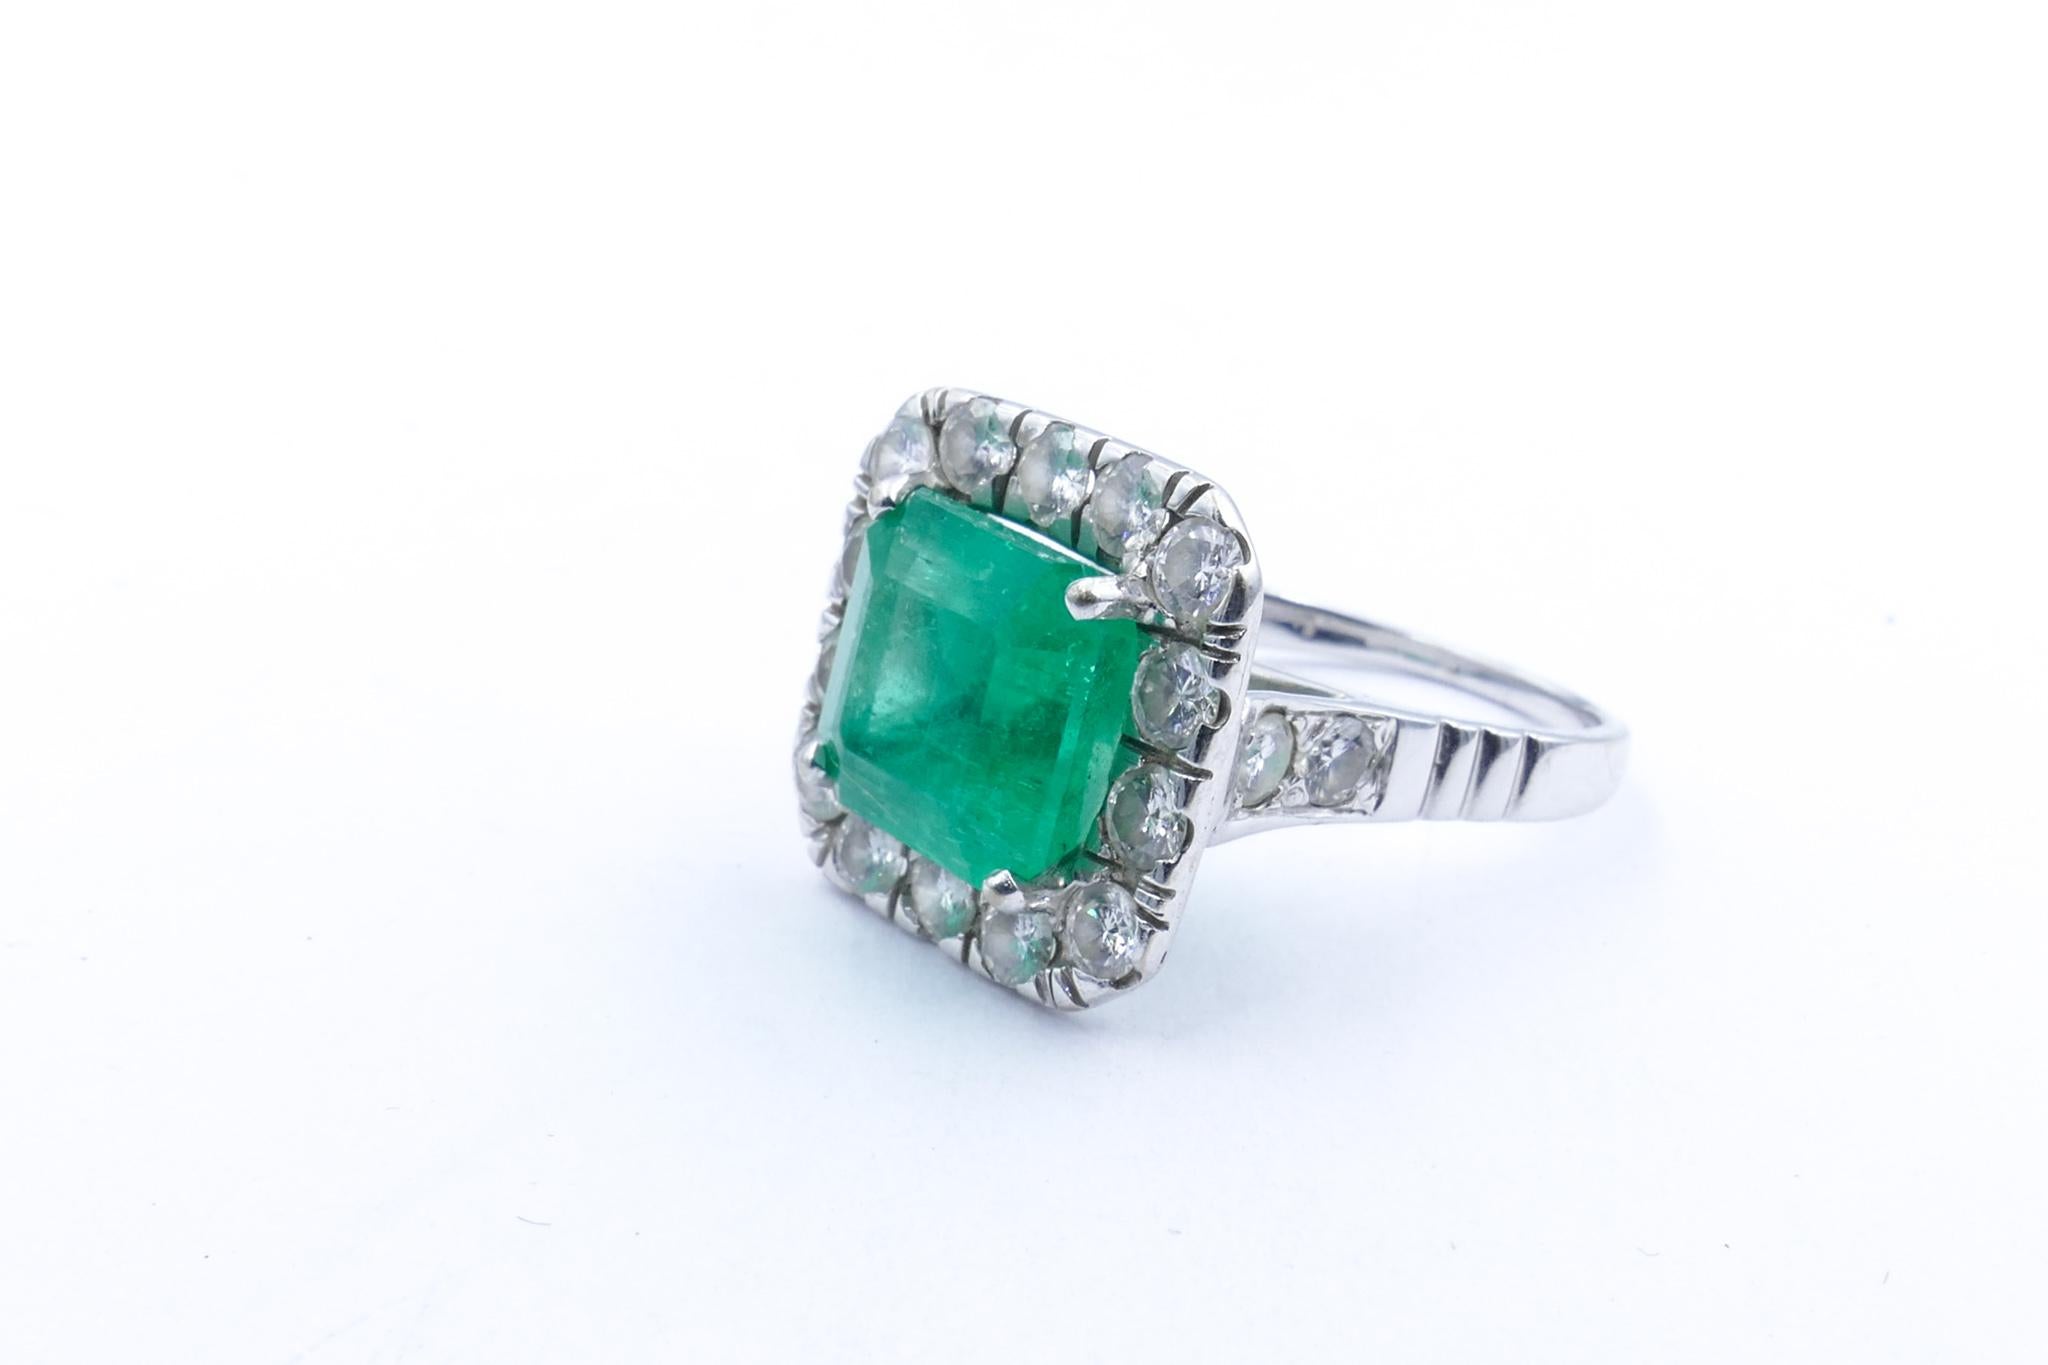 Of a gorgeous mid bluish- green Colour this fine Square Emerald Stone of 5.23 carats, measuring 10.26mm X 10.09mm X 7.07mm is the Centrepiece of  this outstanding Ring & is surrounded by 18 Round Brilliant Cut Diamonds, Bead Set,
Colour G/H &